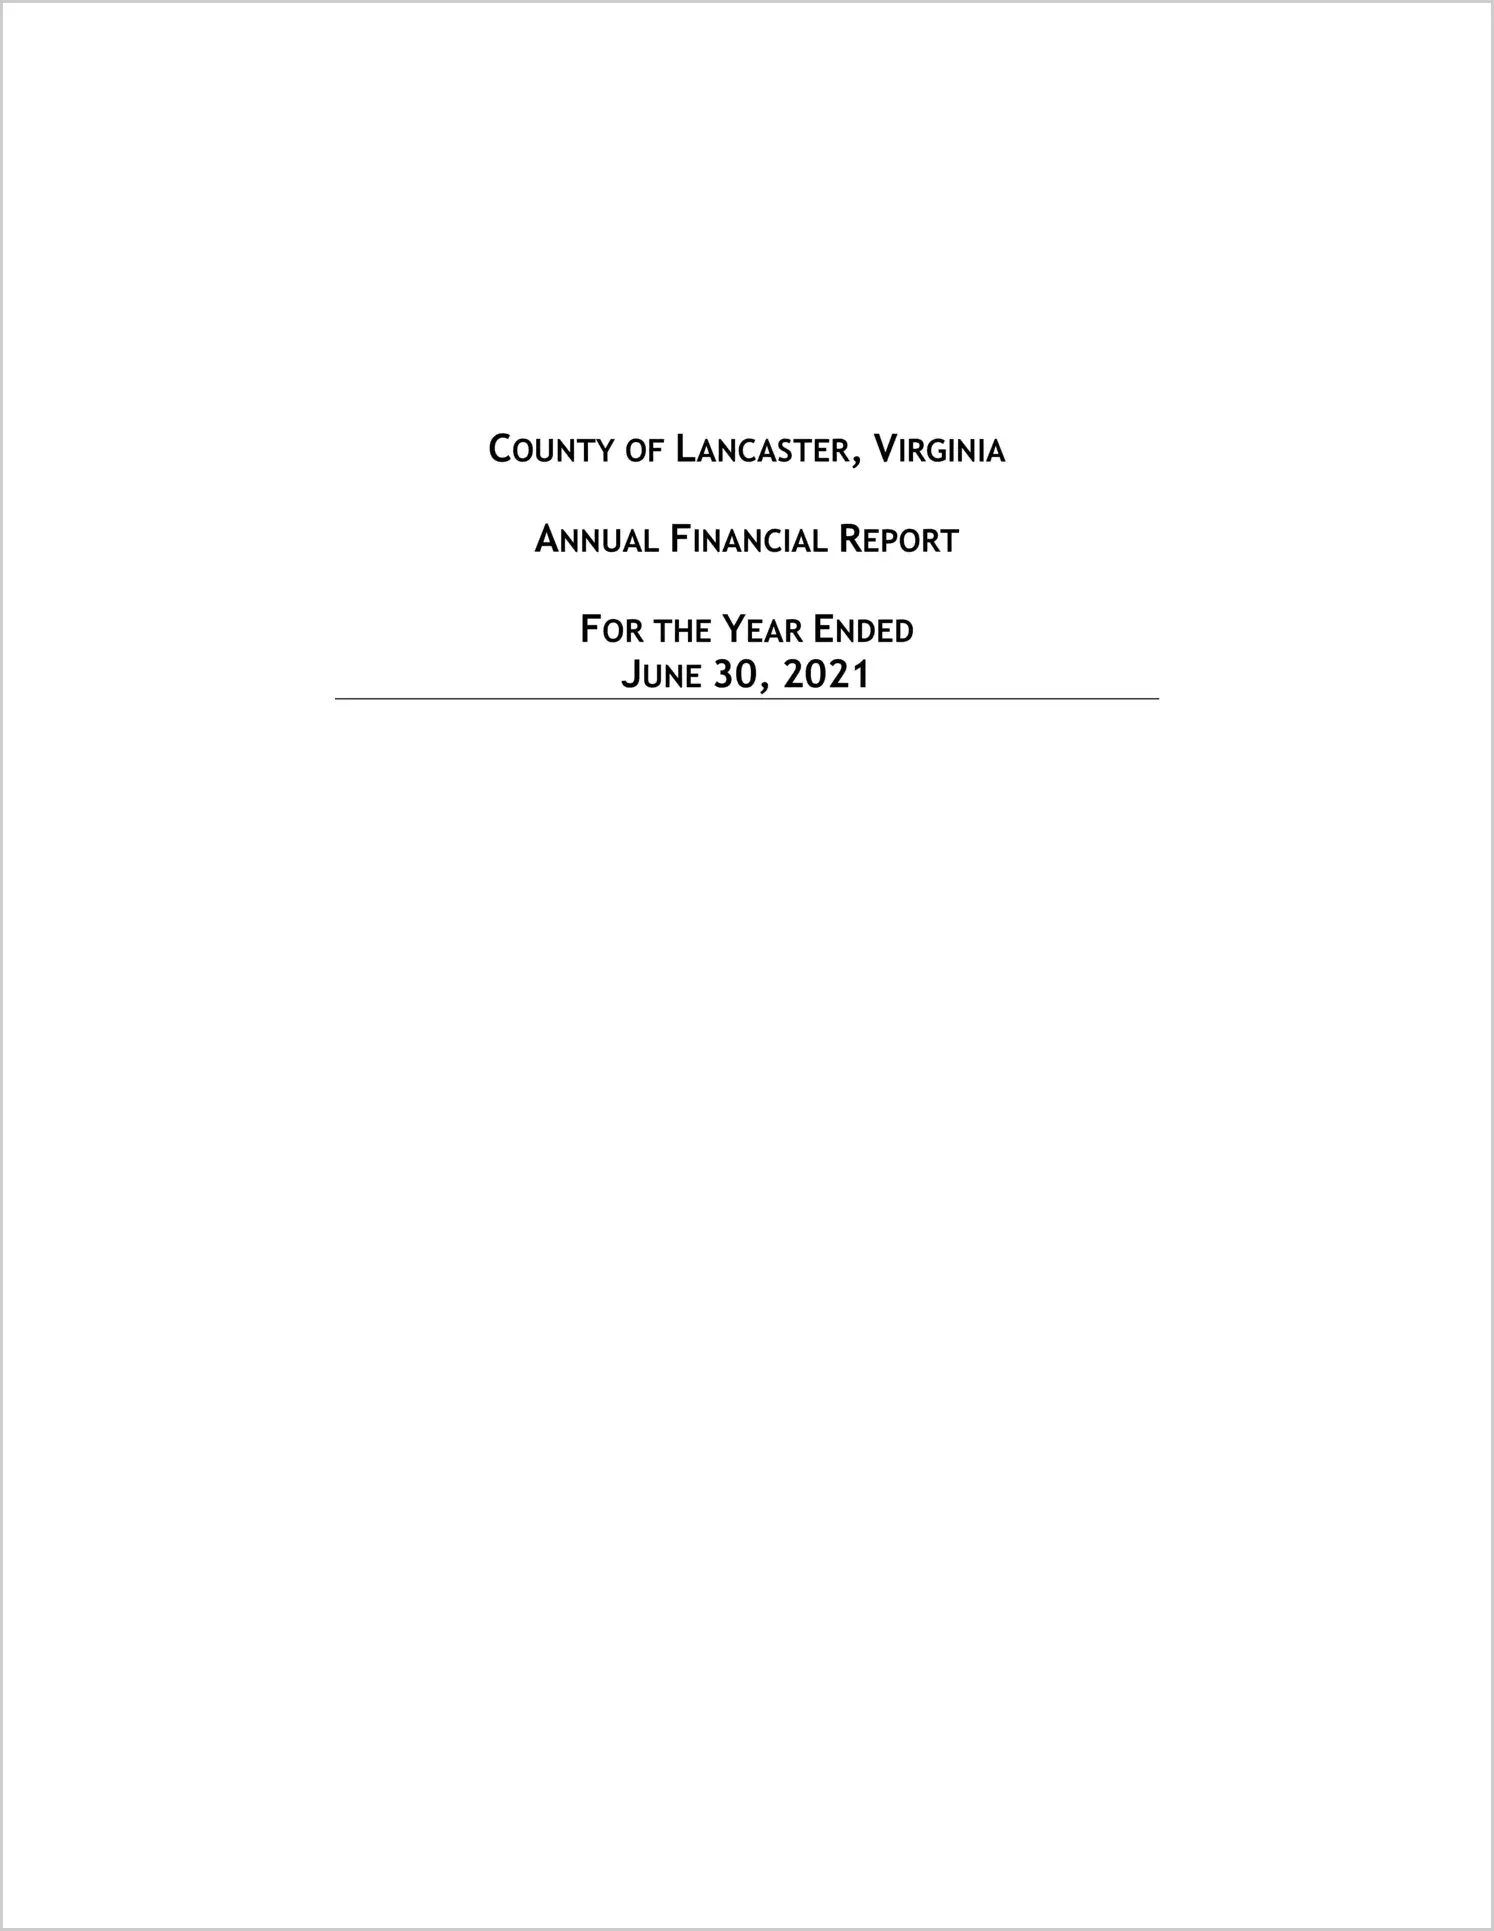 2021 Annual Financial Report for County of Lancaster